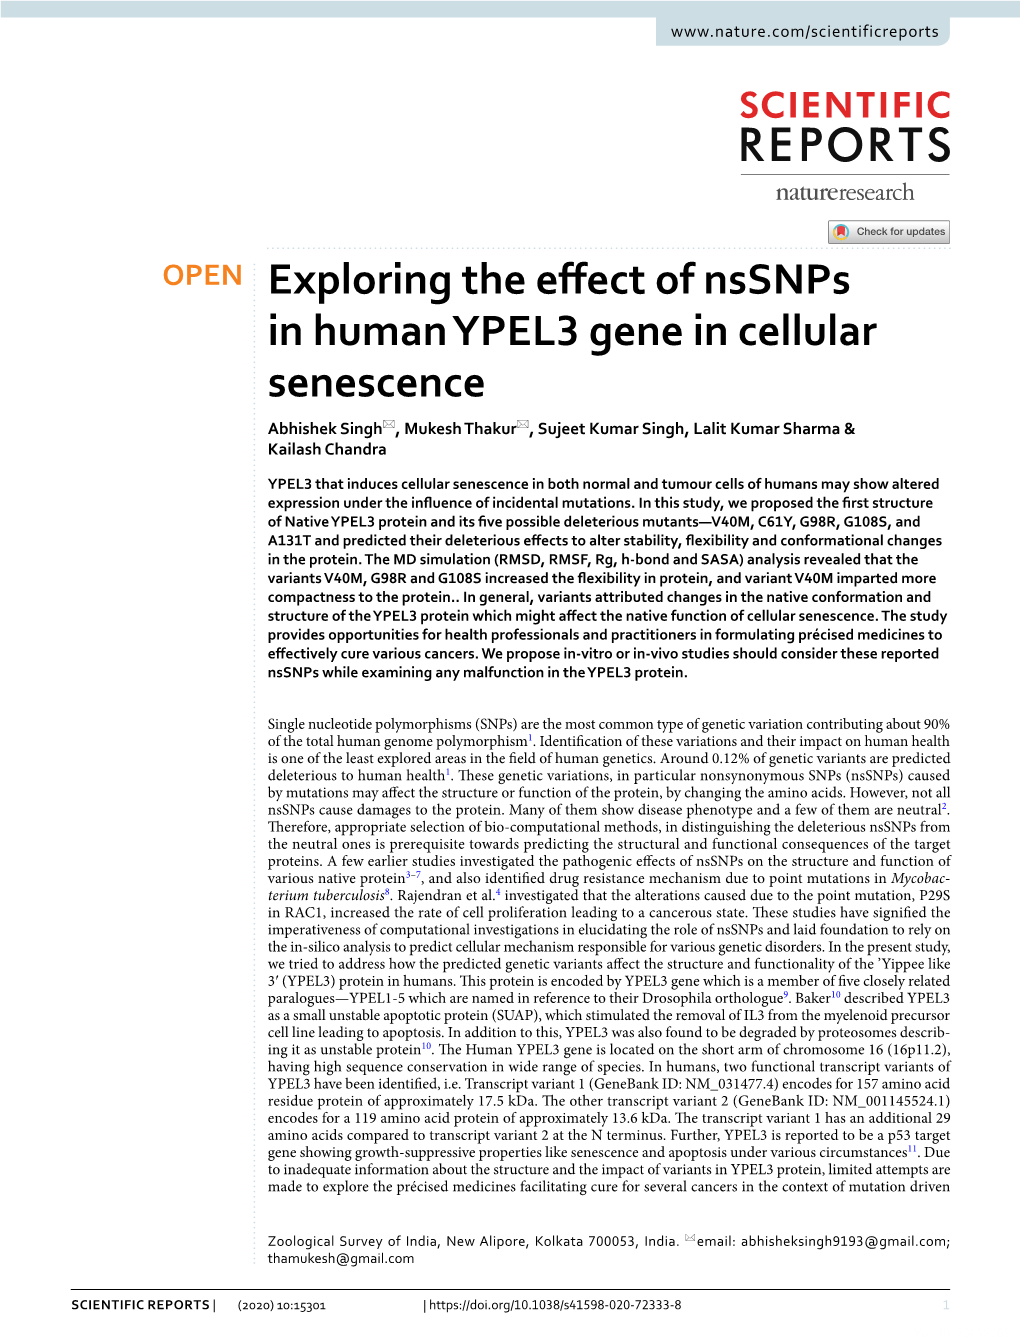 Exploring the Effect of Nssnps in Human YPEL3 Gene in Cellular